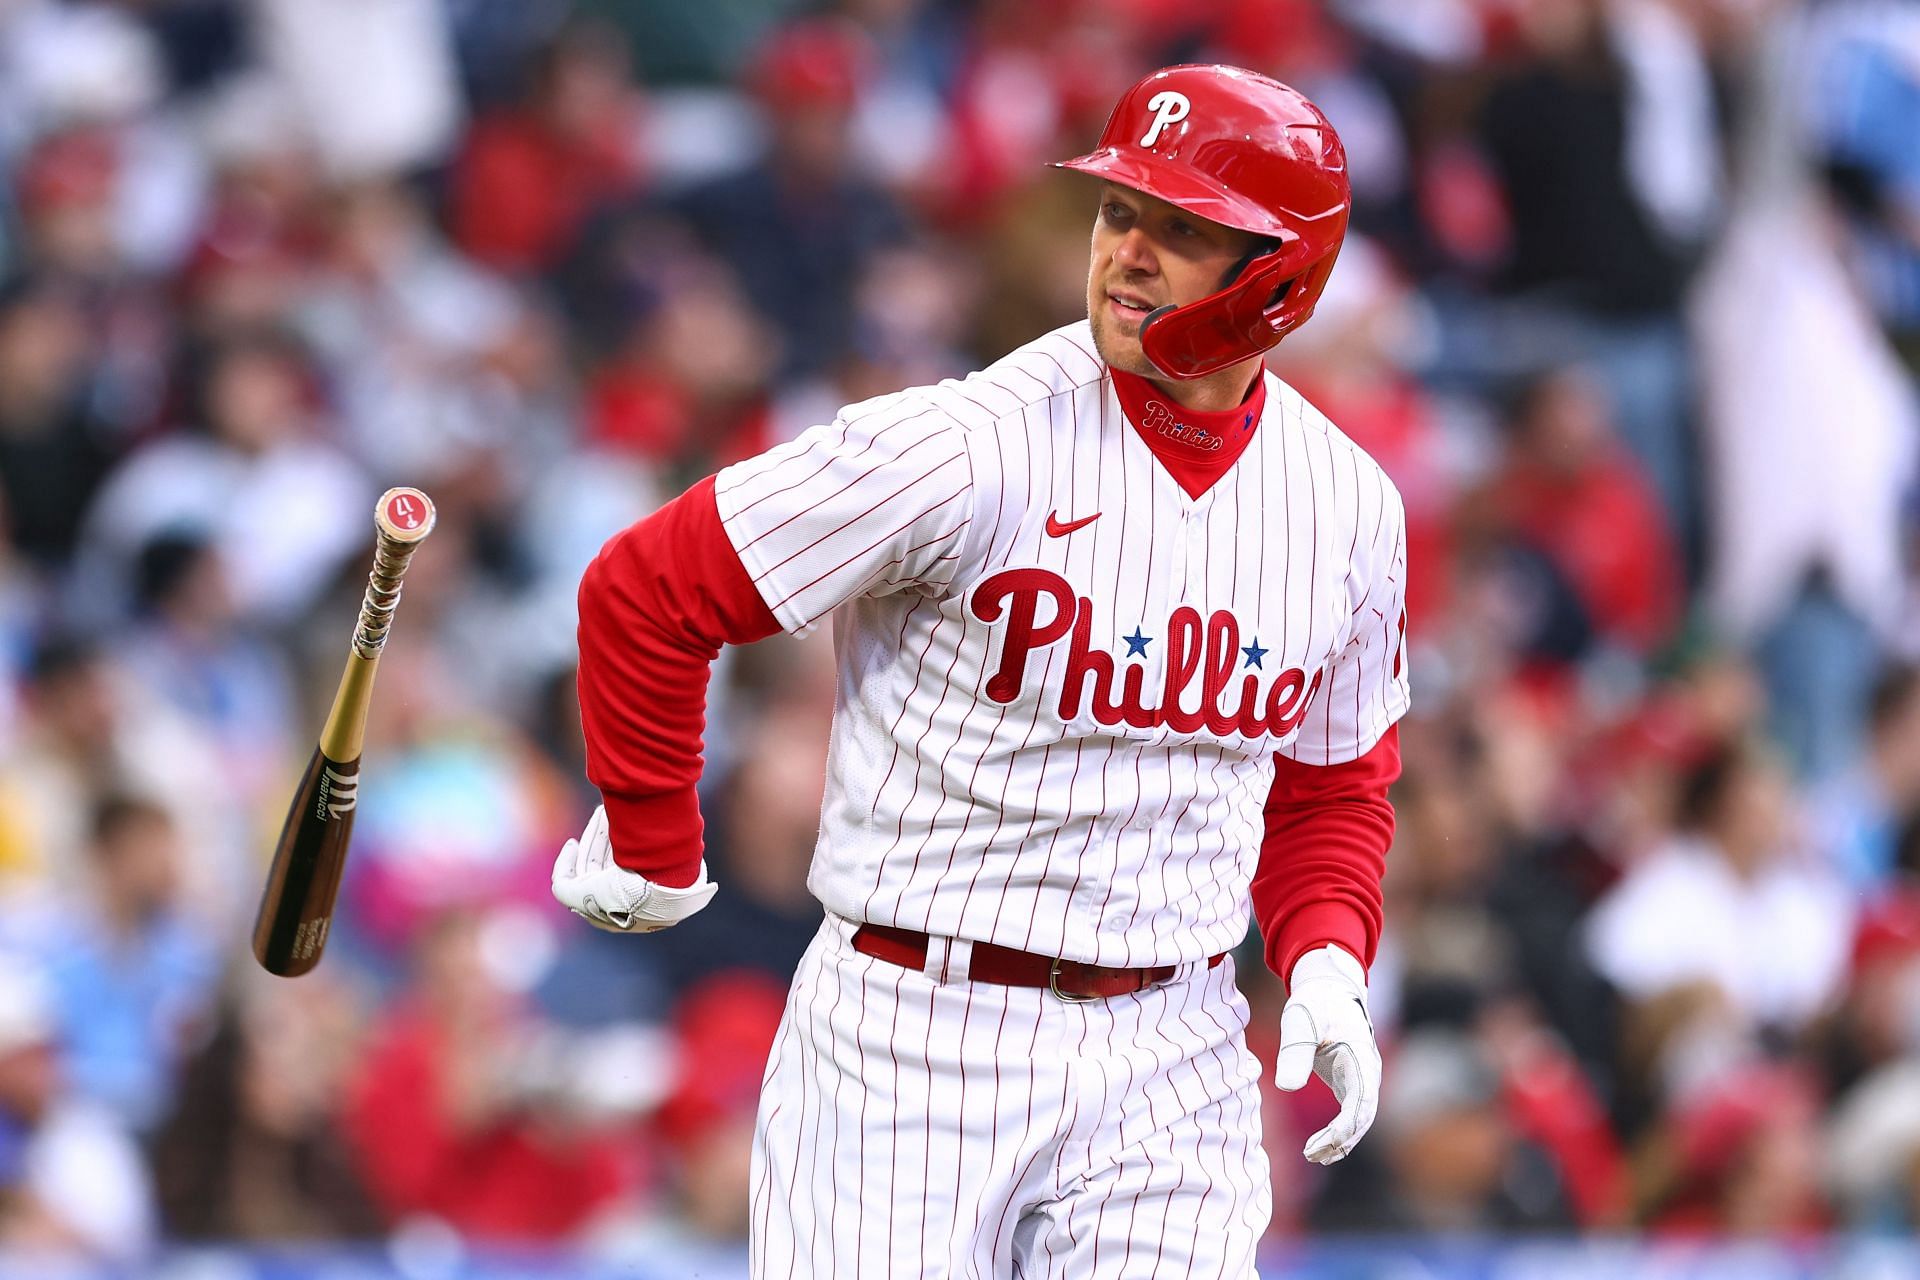 Watch Philadelphia Phillies first baseman Rhys Hoskins blasts a home run in the first inning as the team looks to extend 7-game winning streak